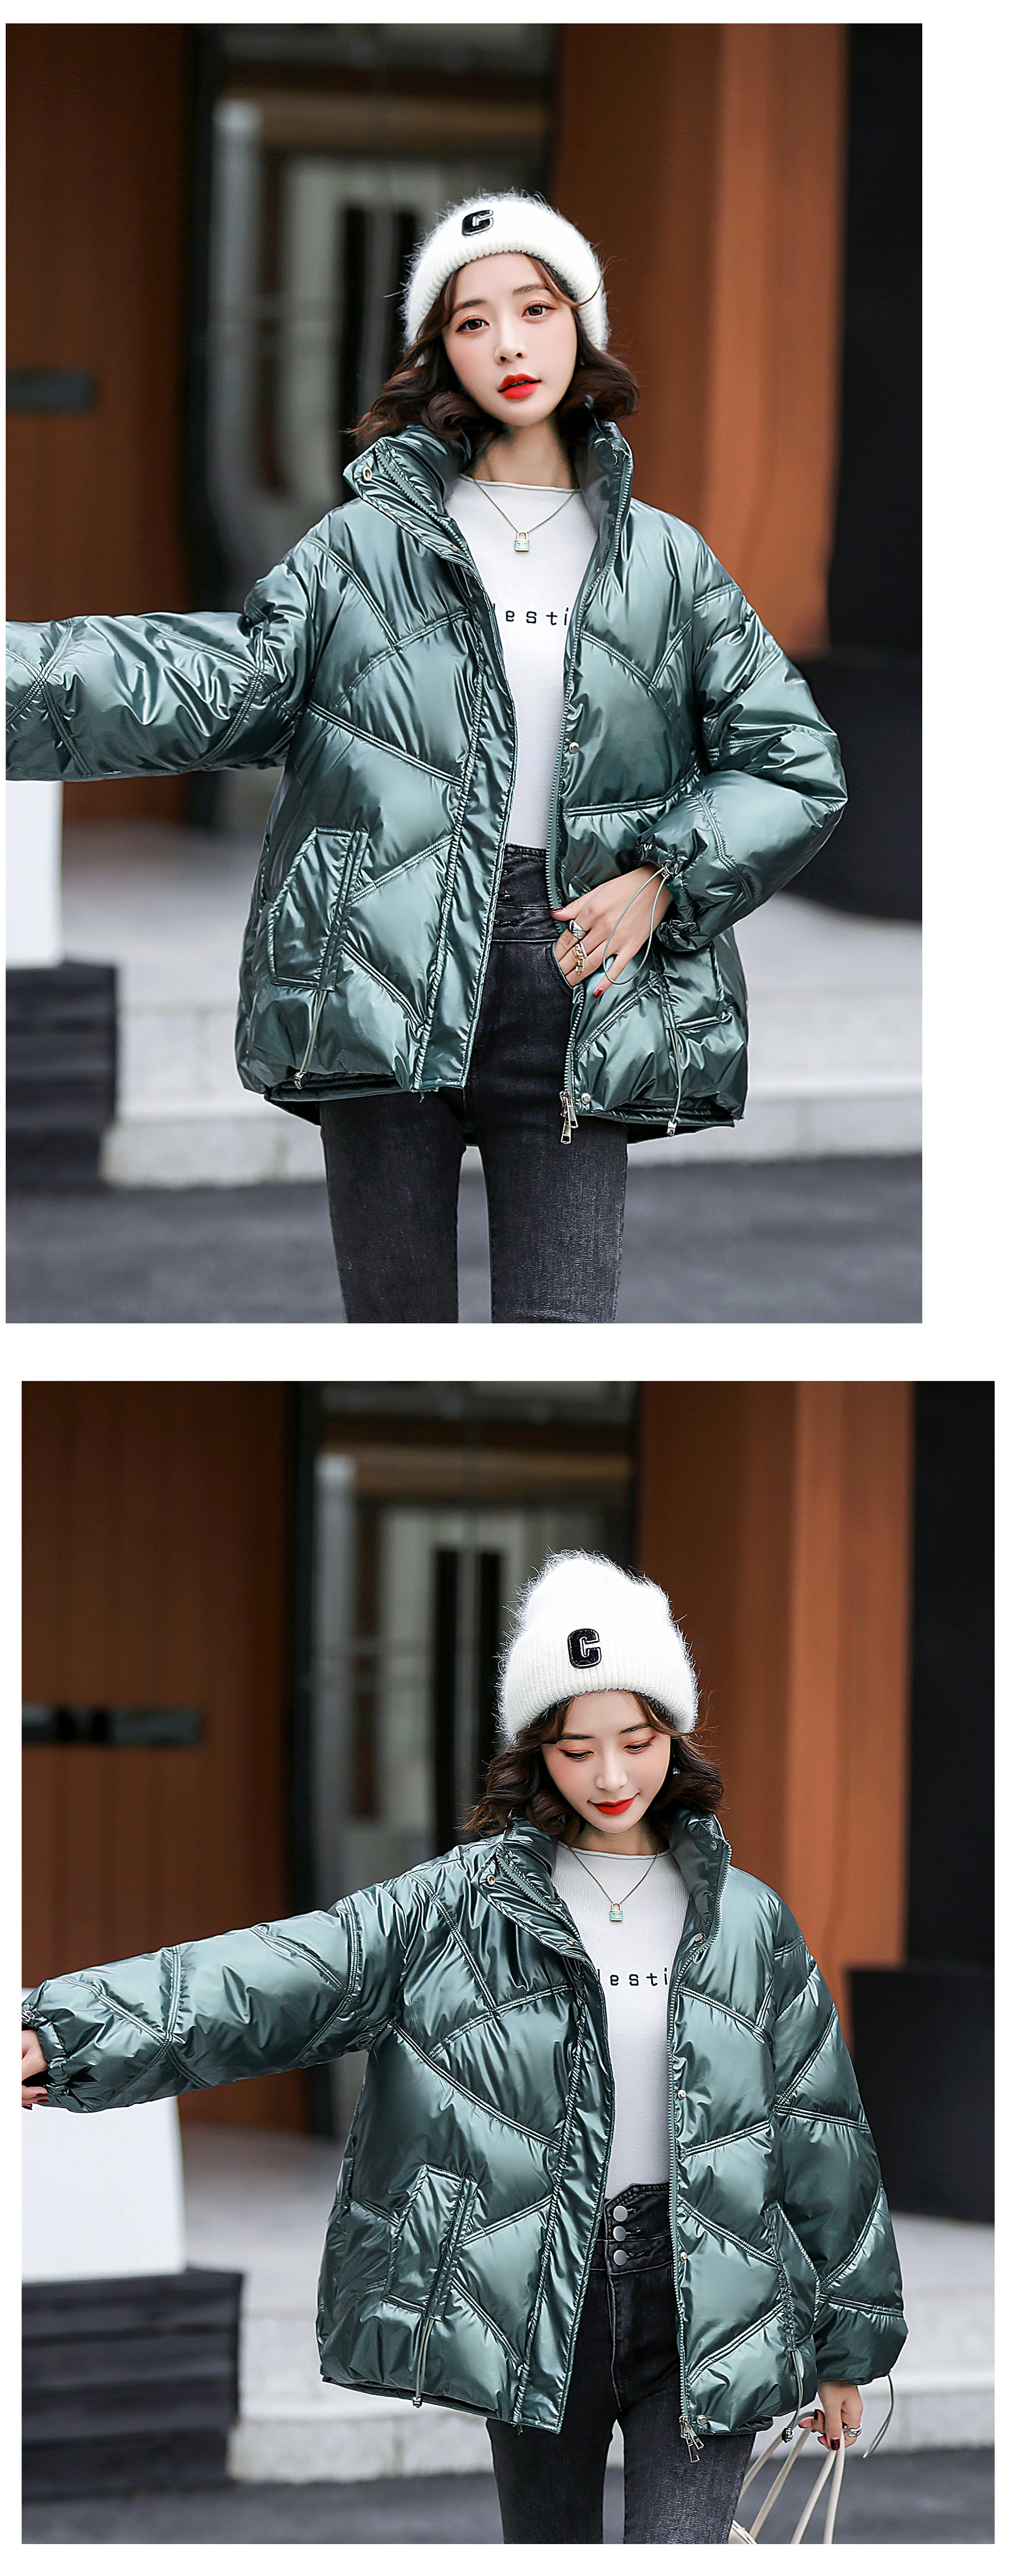 Women's Cropped Puffer Jacket Fashion Winter Outfit Coat12